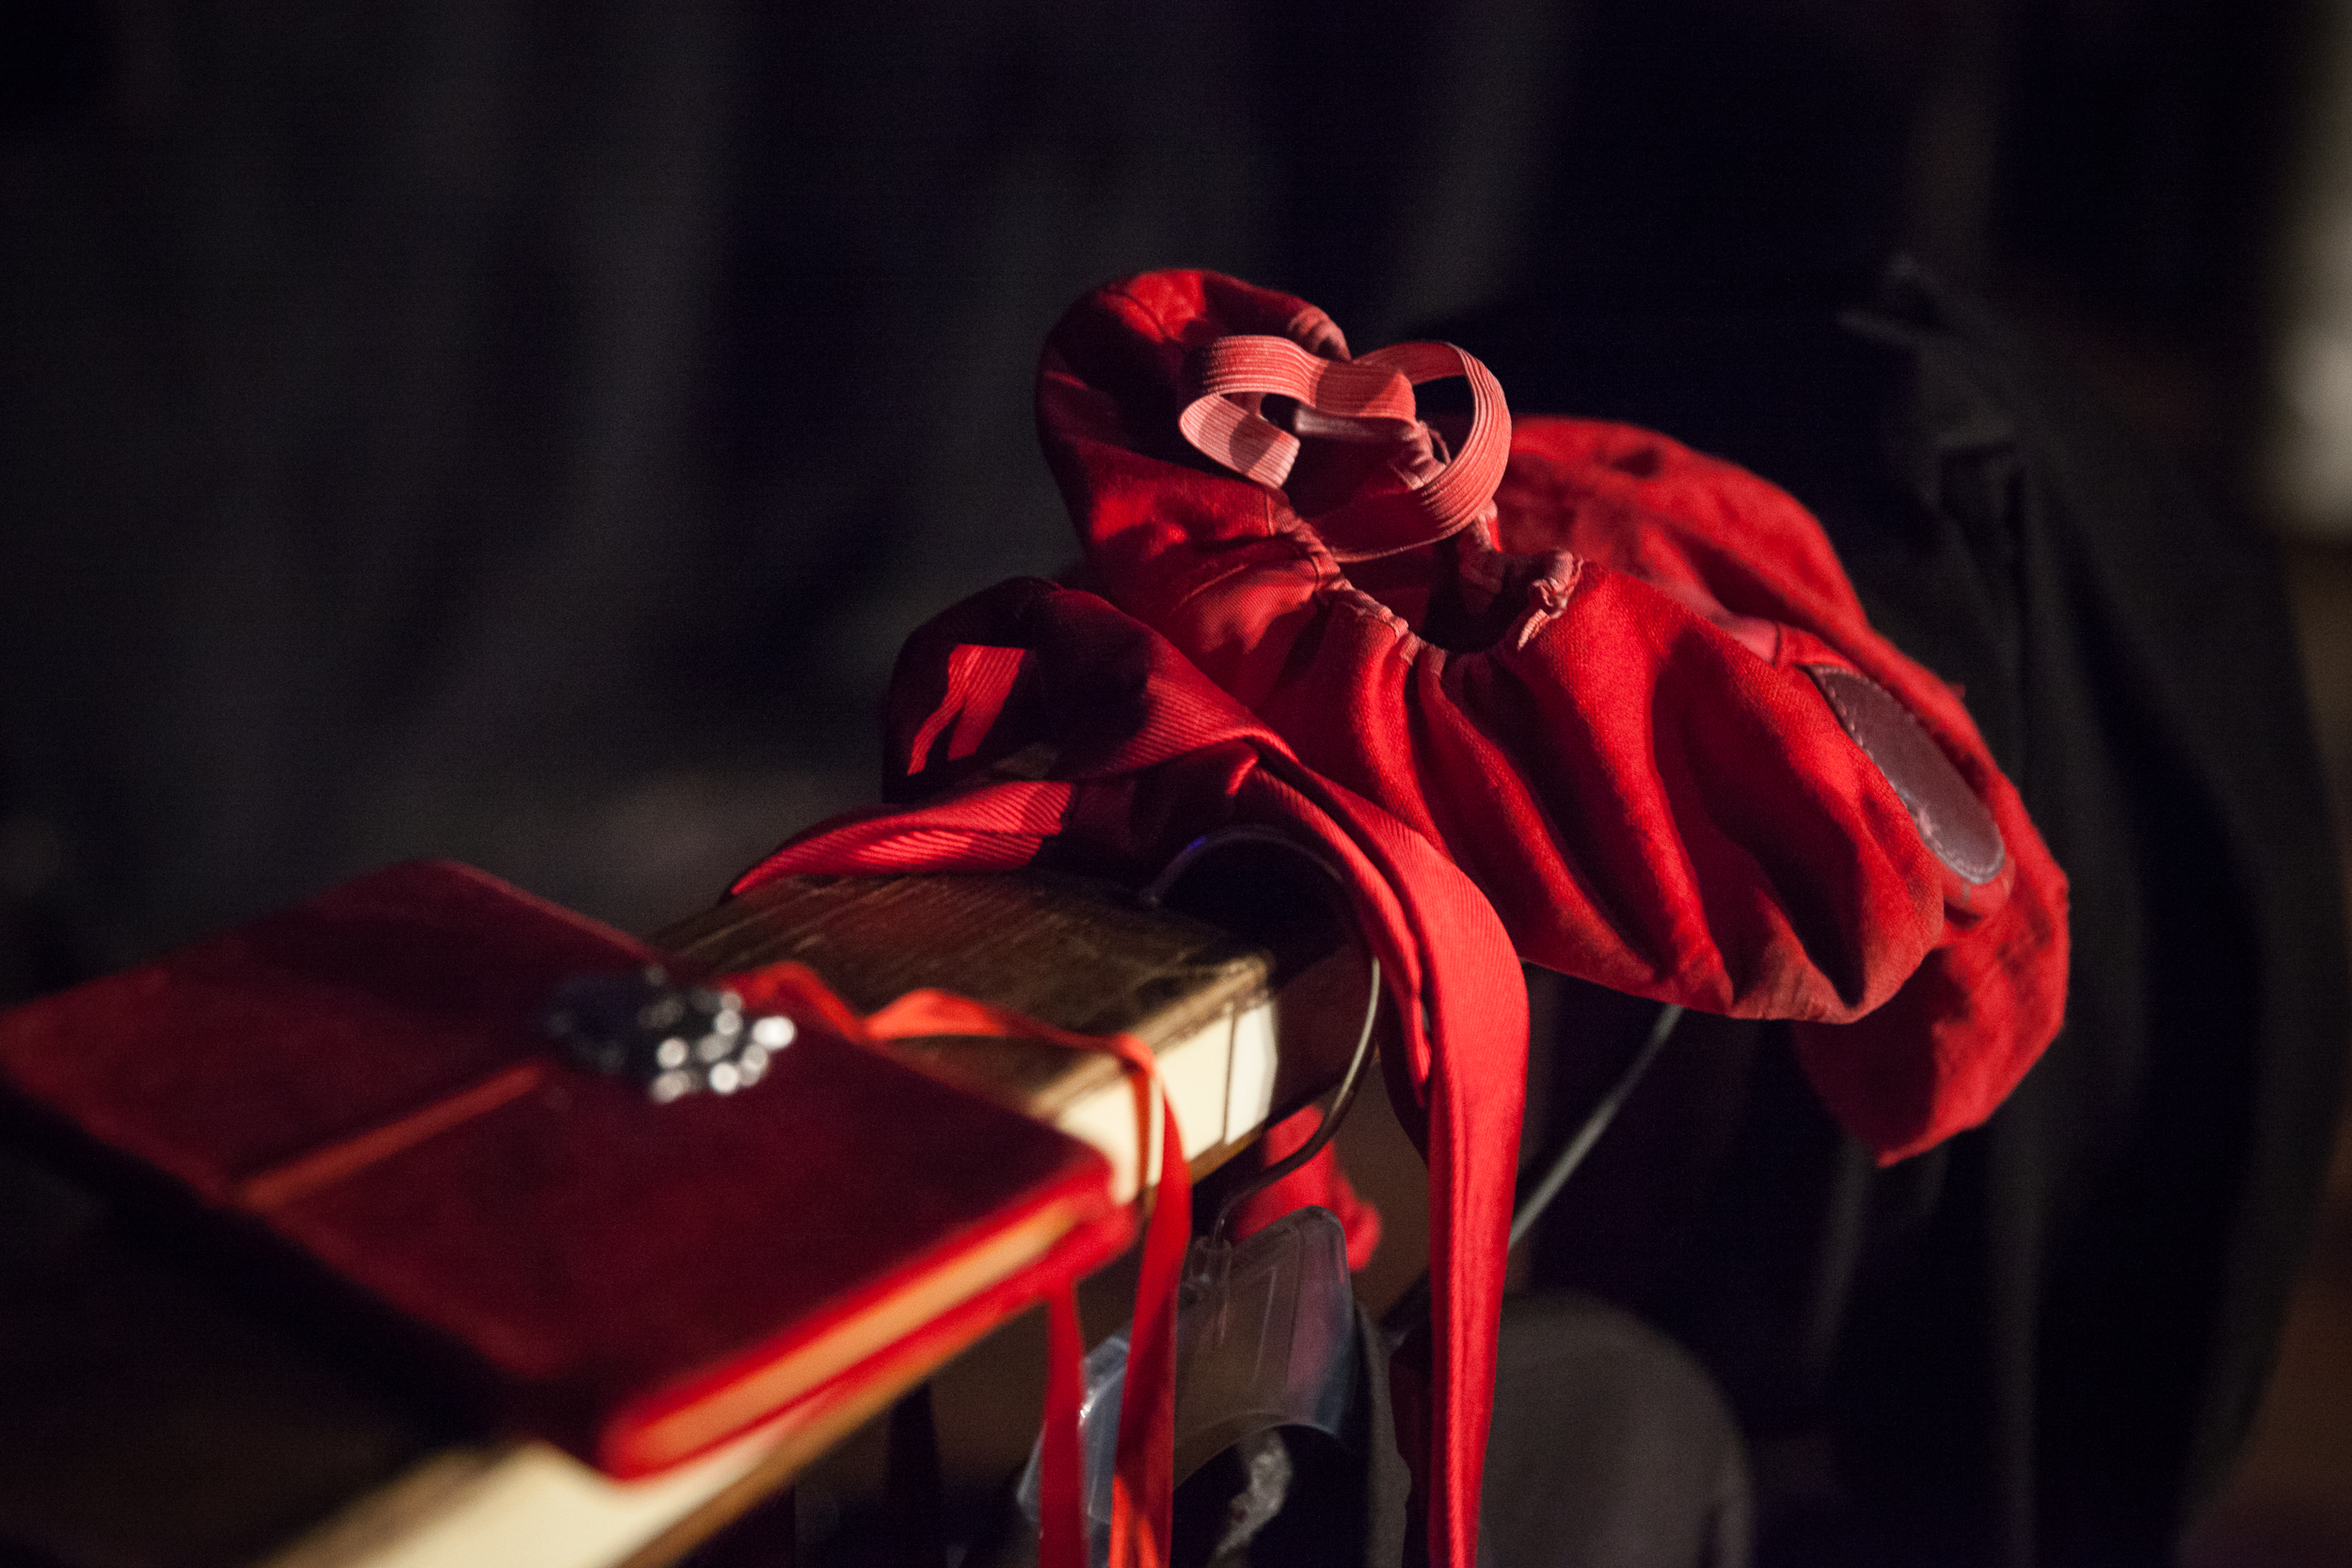  The red shoes of 3e étage. 